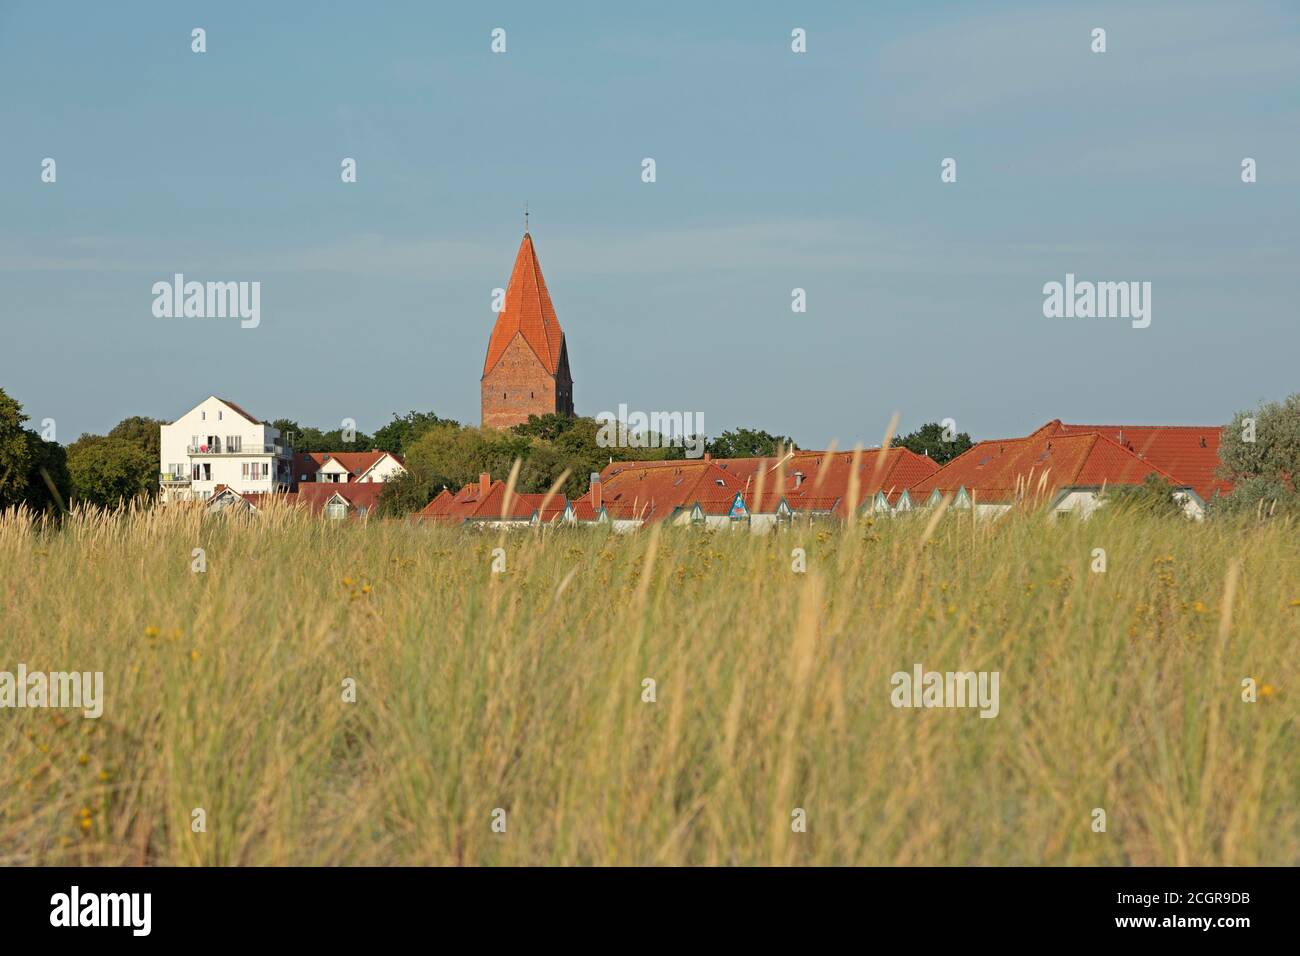 view of the town and the church, Rerik, Mecklenburg-West Pomerania, Germany Stock Photo